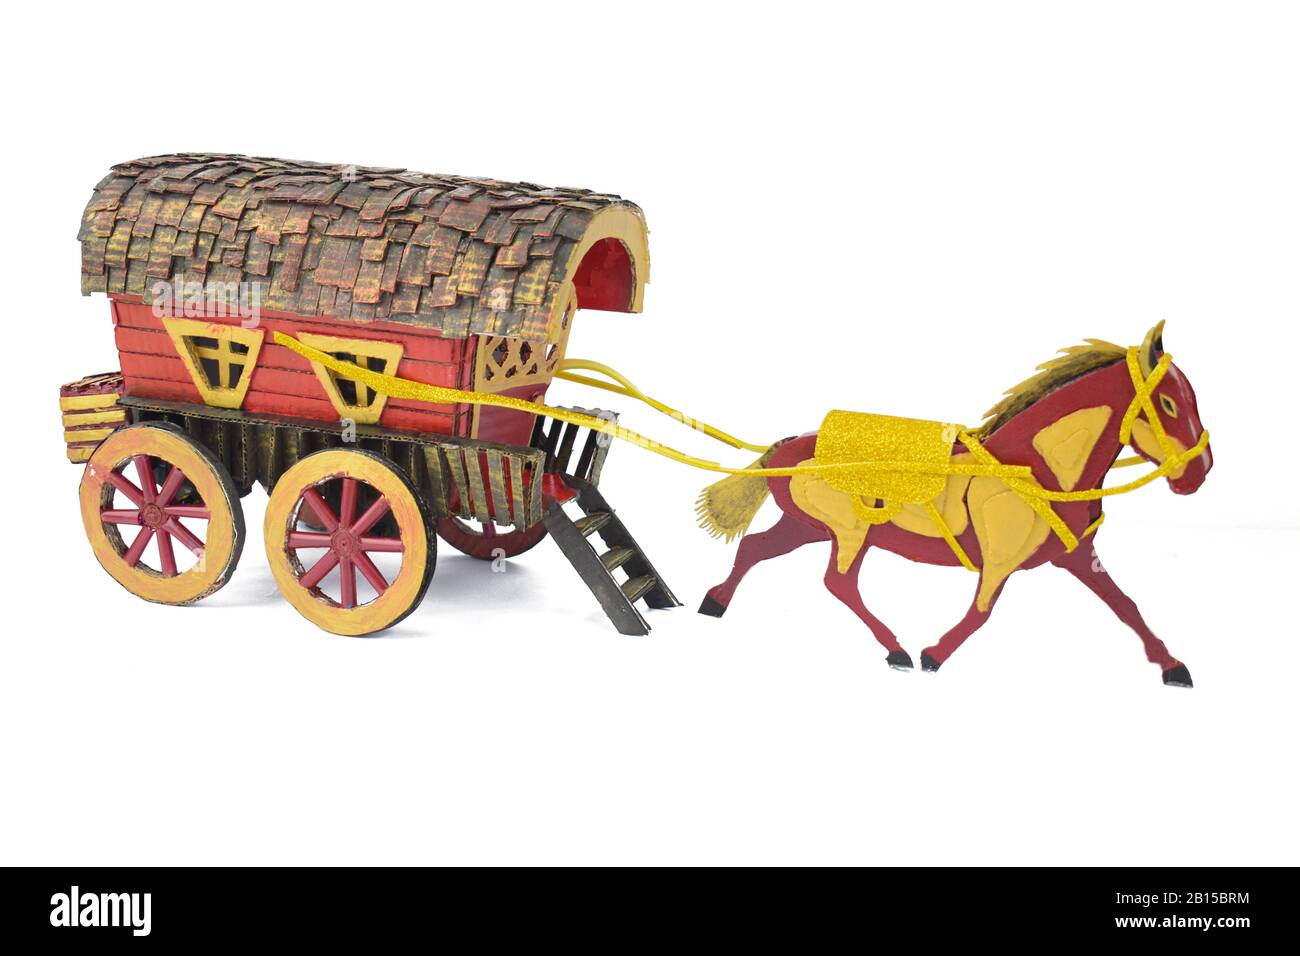 Display of a crafted horse made of card board pulling a carriage made of the same cardboard before a white background Stock Photo